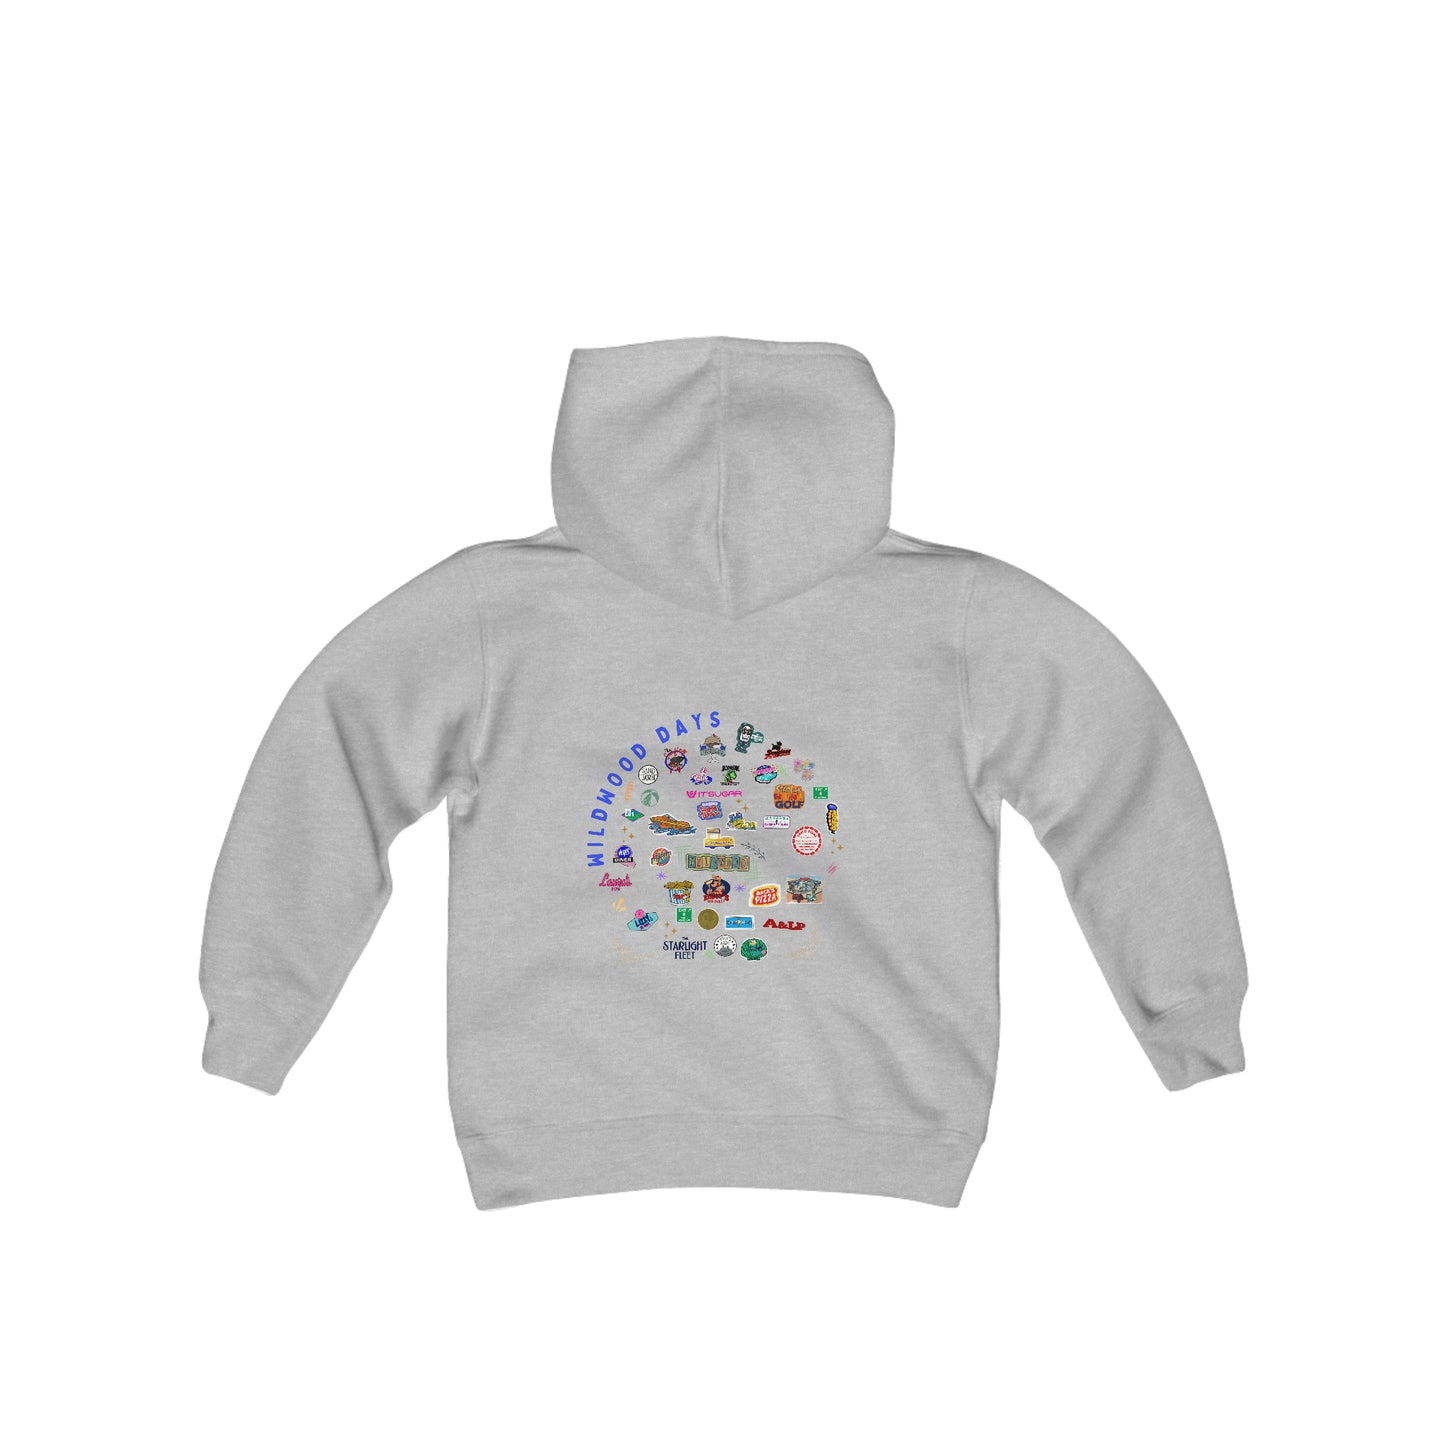 Wildwood, Wildwood Youth, Wildwood Youth Hoodie, Wildwood Decals, Heavy Blend Hooded Sweatshirt, Free Shipping